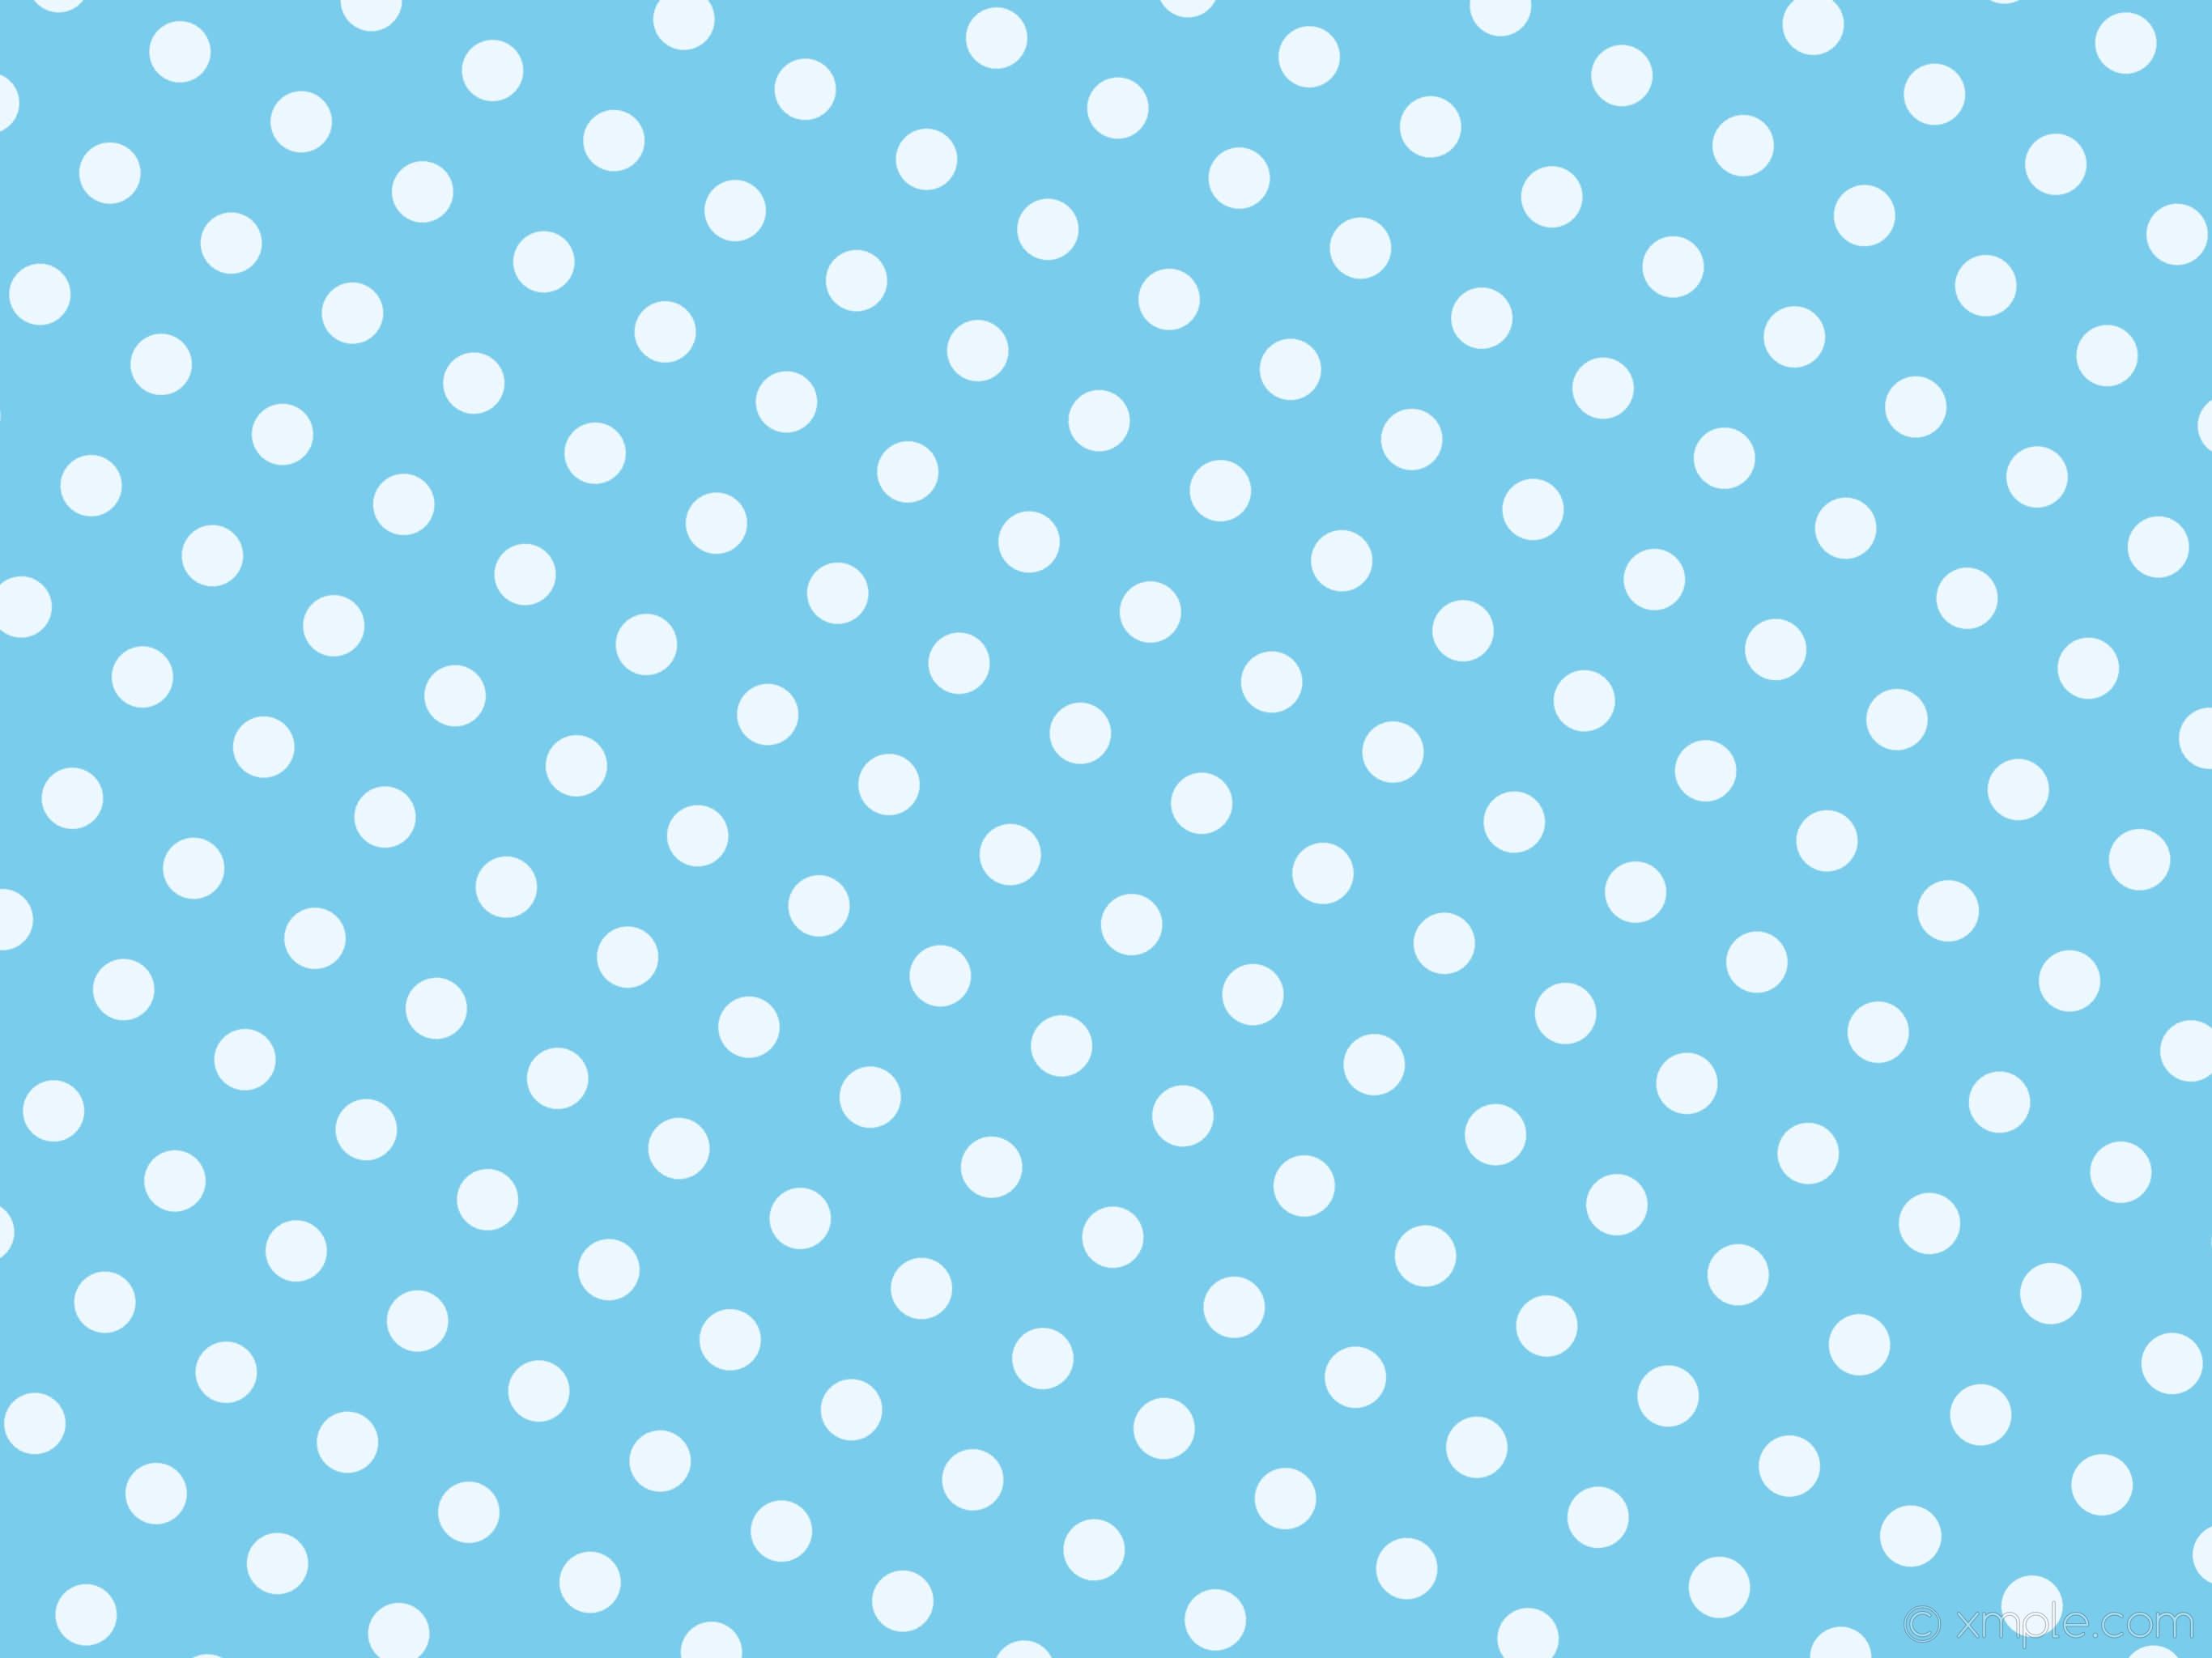 baby blue polka dot background 6. Background Check All